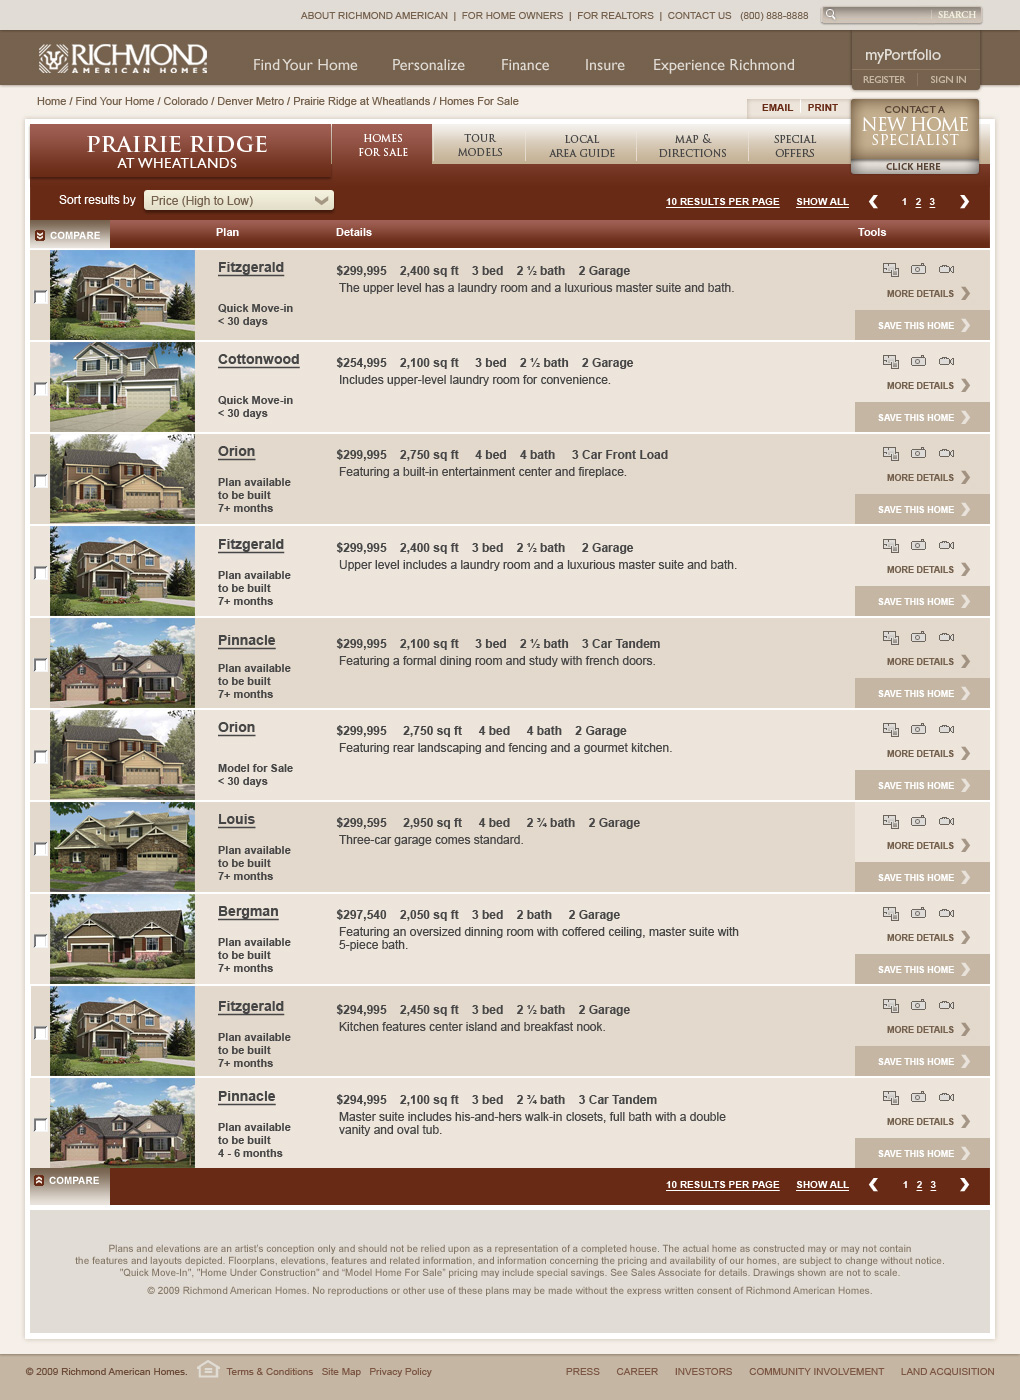 A full redesign for the entire Richmond American Homes site.